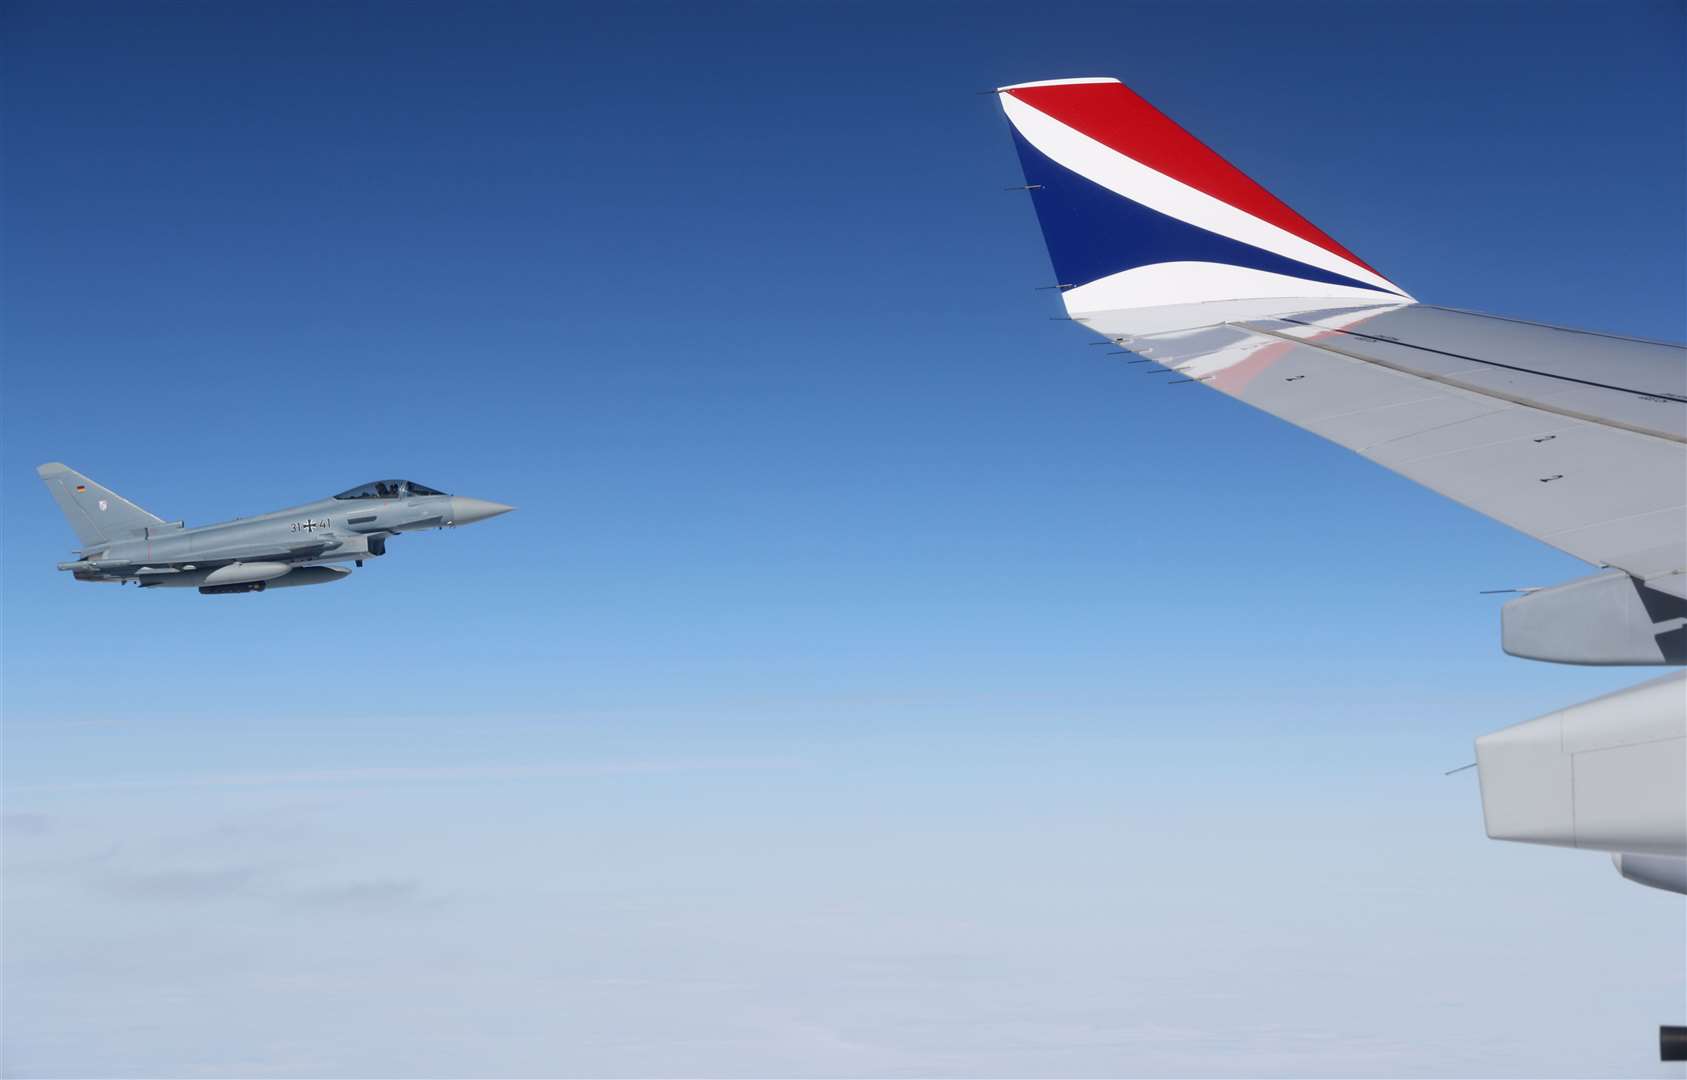 A German Eurofighter Typhoon escorts the aircraft carrying the King and the Queen Consort through German airspace as they travel towards Berlin (Adrian Dennis/PA)